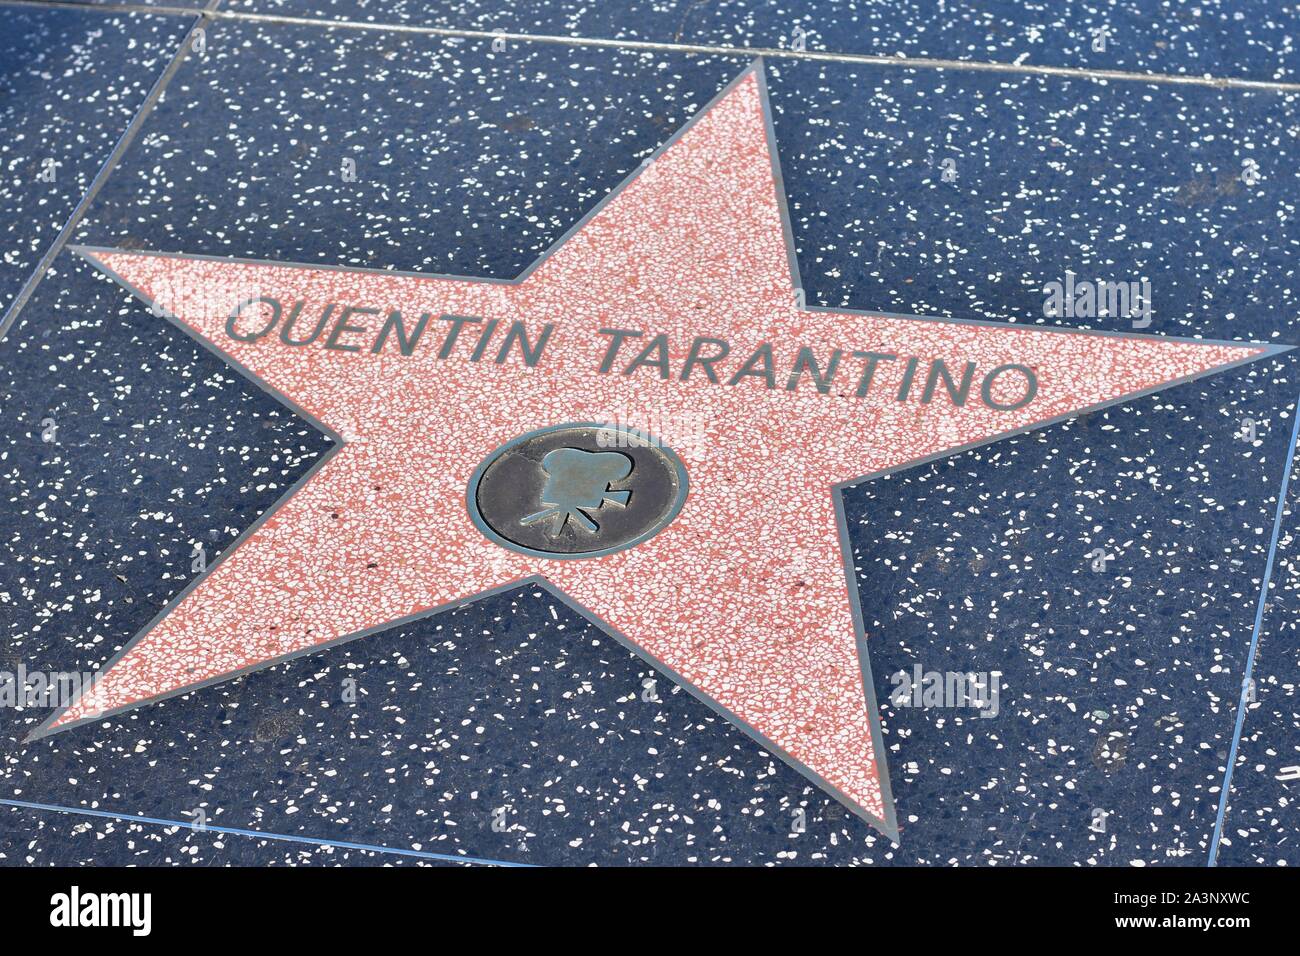 Quentin Tarantino star on the Hollywood walk of fame Stock Photo